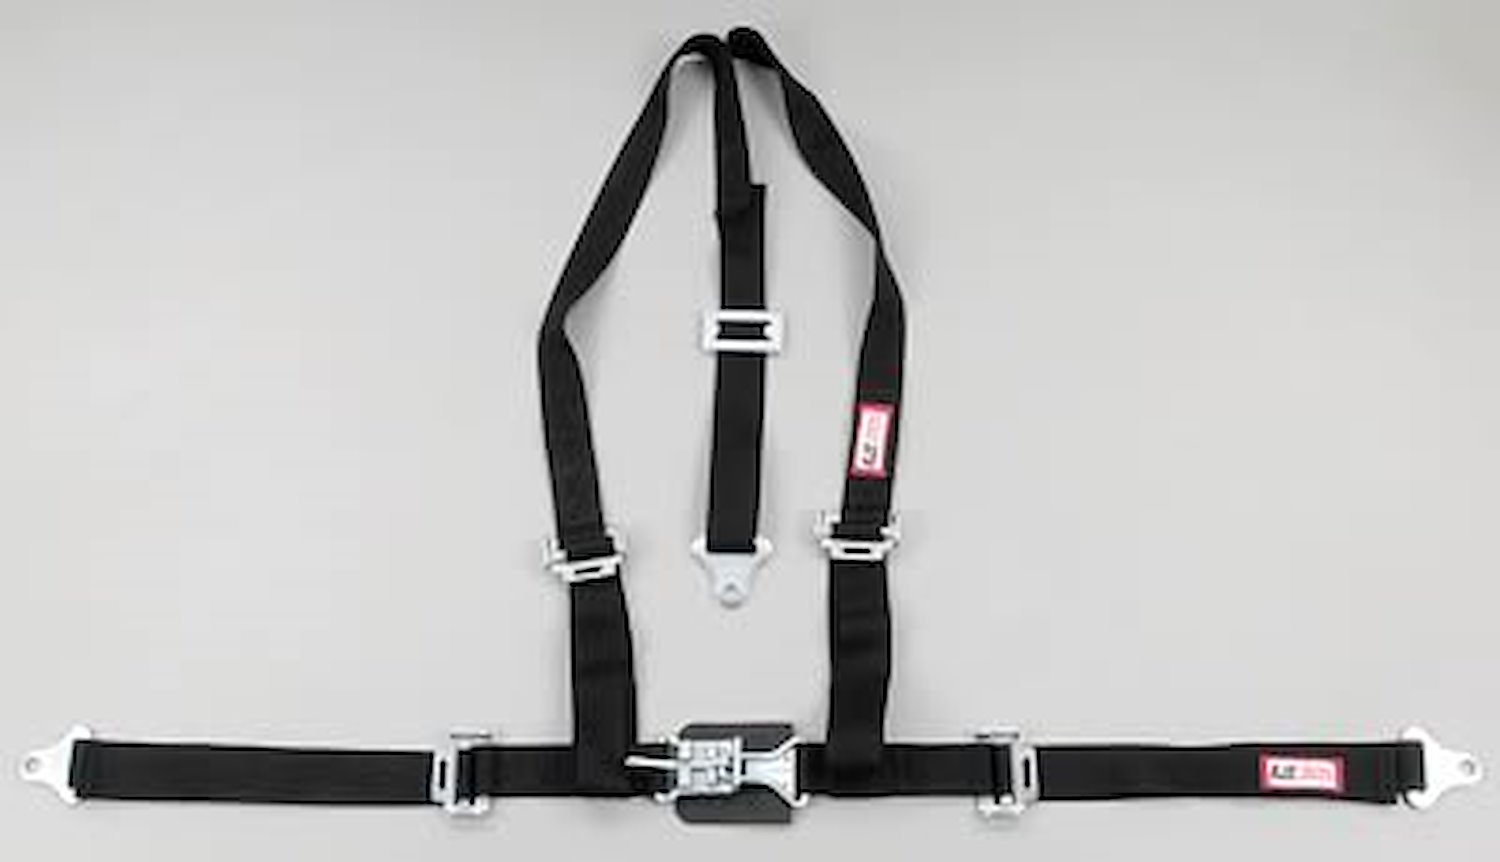 NON-SFI L&L HARNESS 2 PULL UP Lap Belt SNAP SEWN IN 2 S.H. INDIVIDUAL FLOOR Mount WRAP/SNAP BLACK